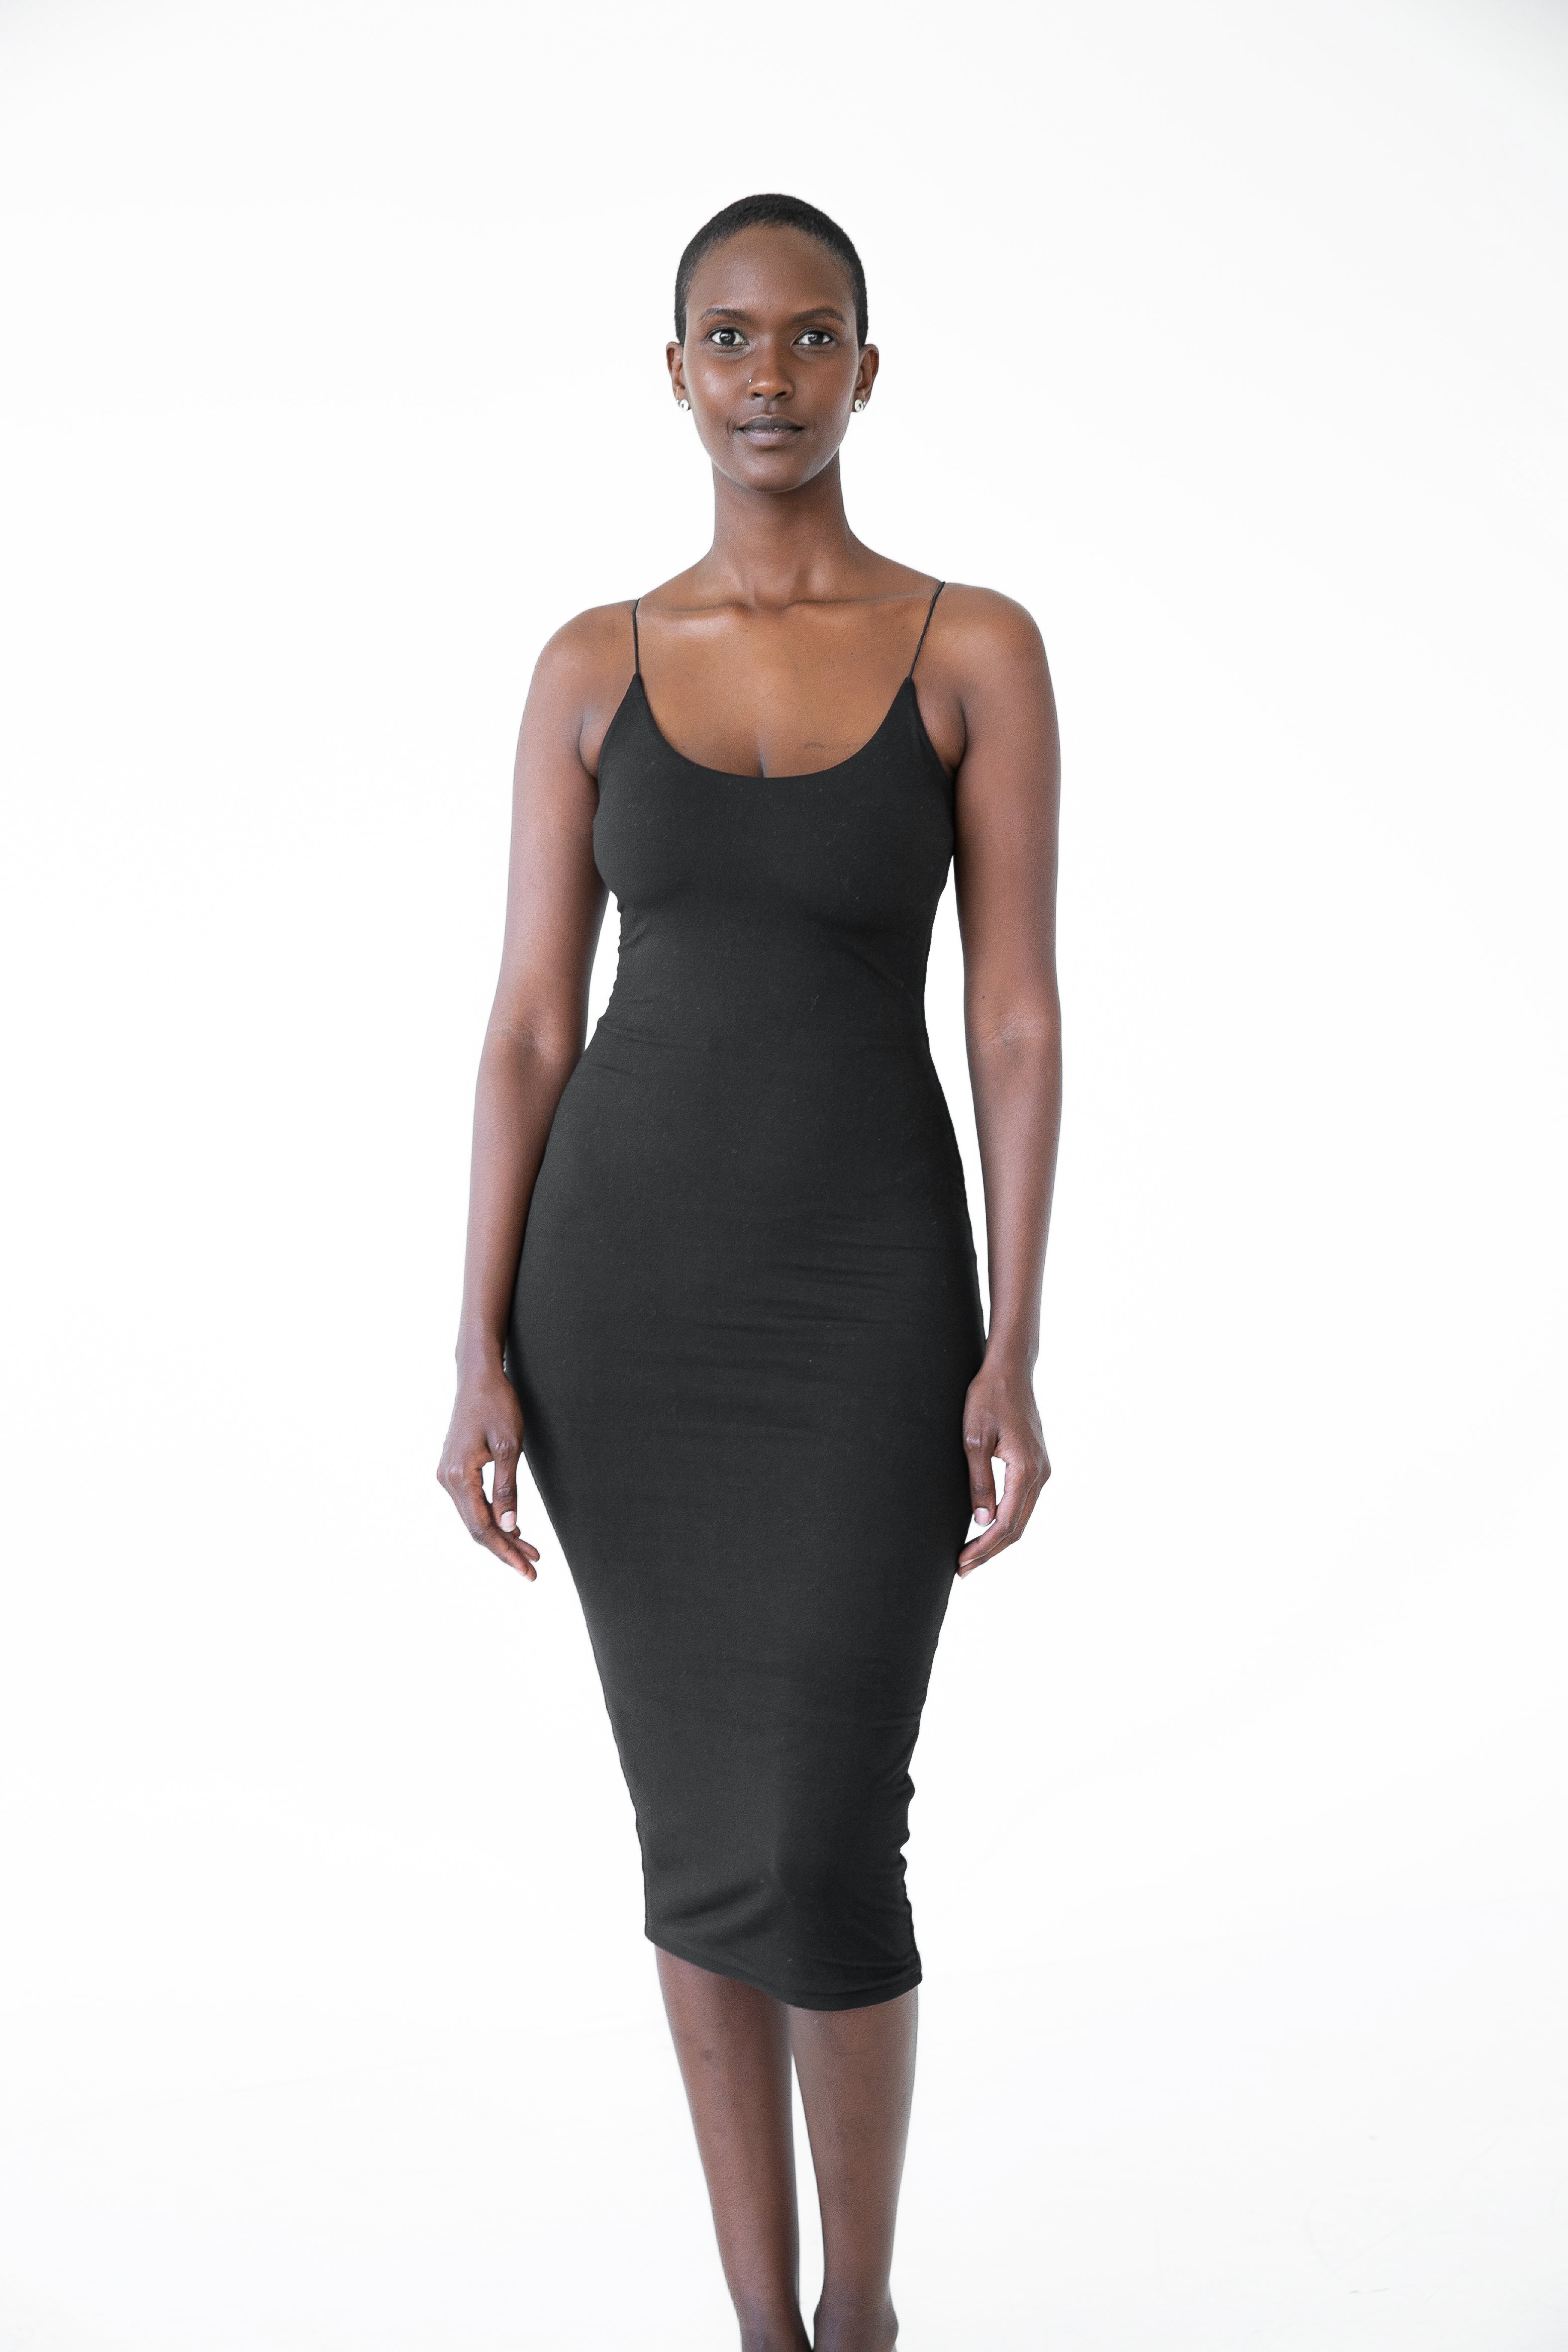 Auroural Black And Friday Deals Clearance Dresses That Hide Tummy